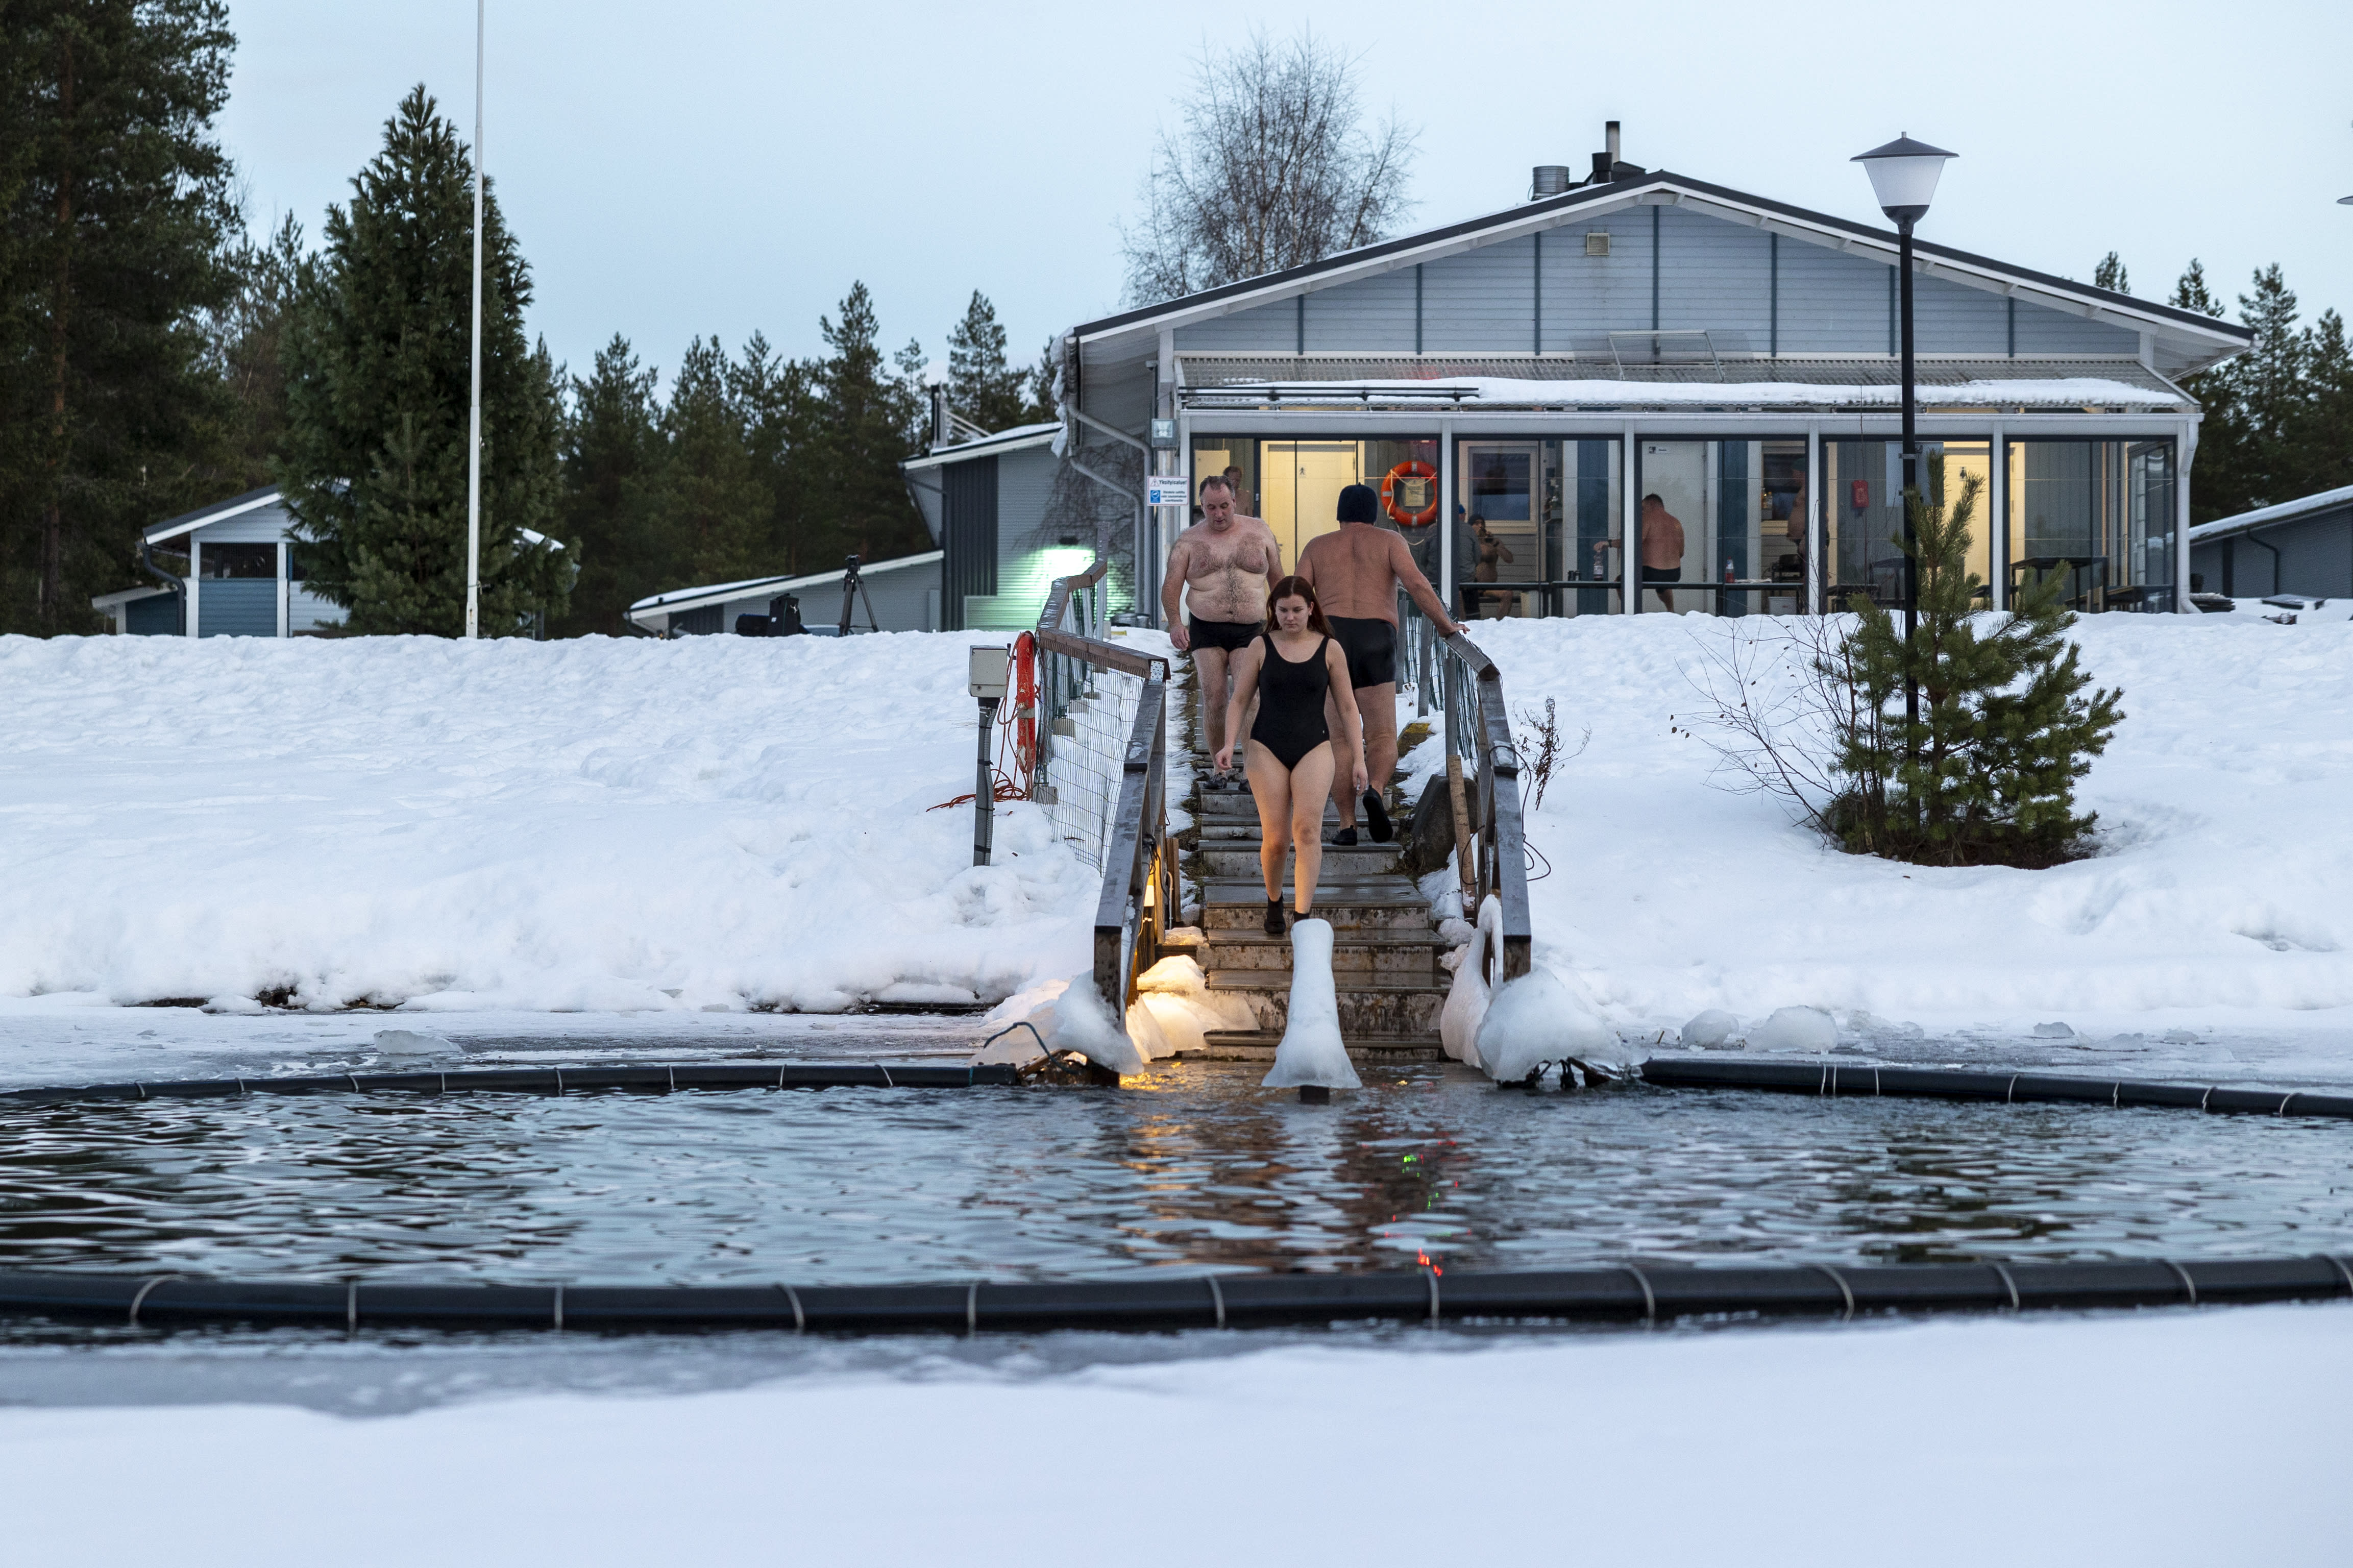 The Finnish National Institute of Health takes a position on winter swimming requirements